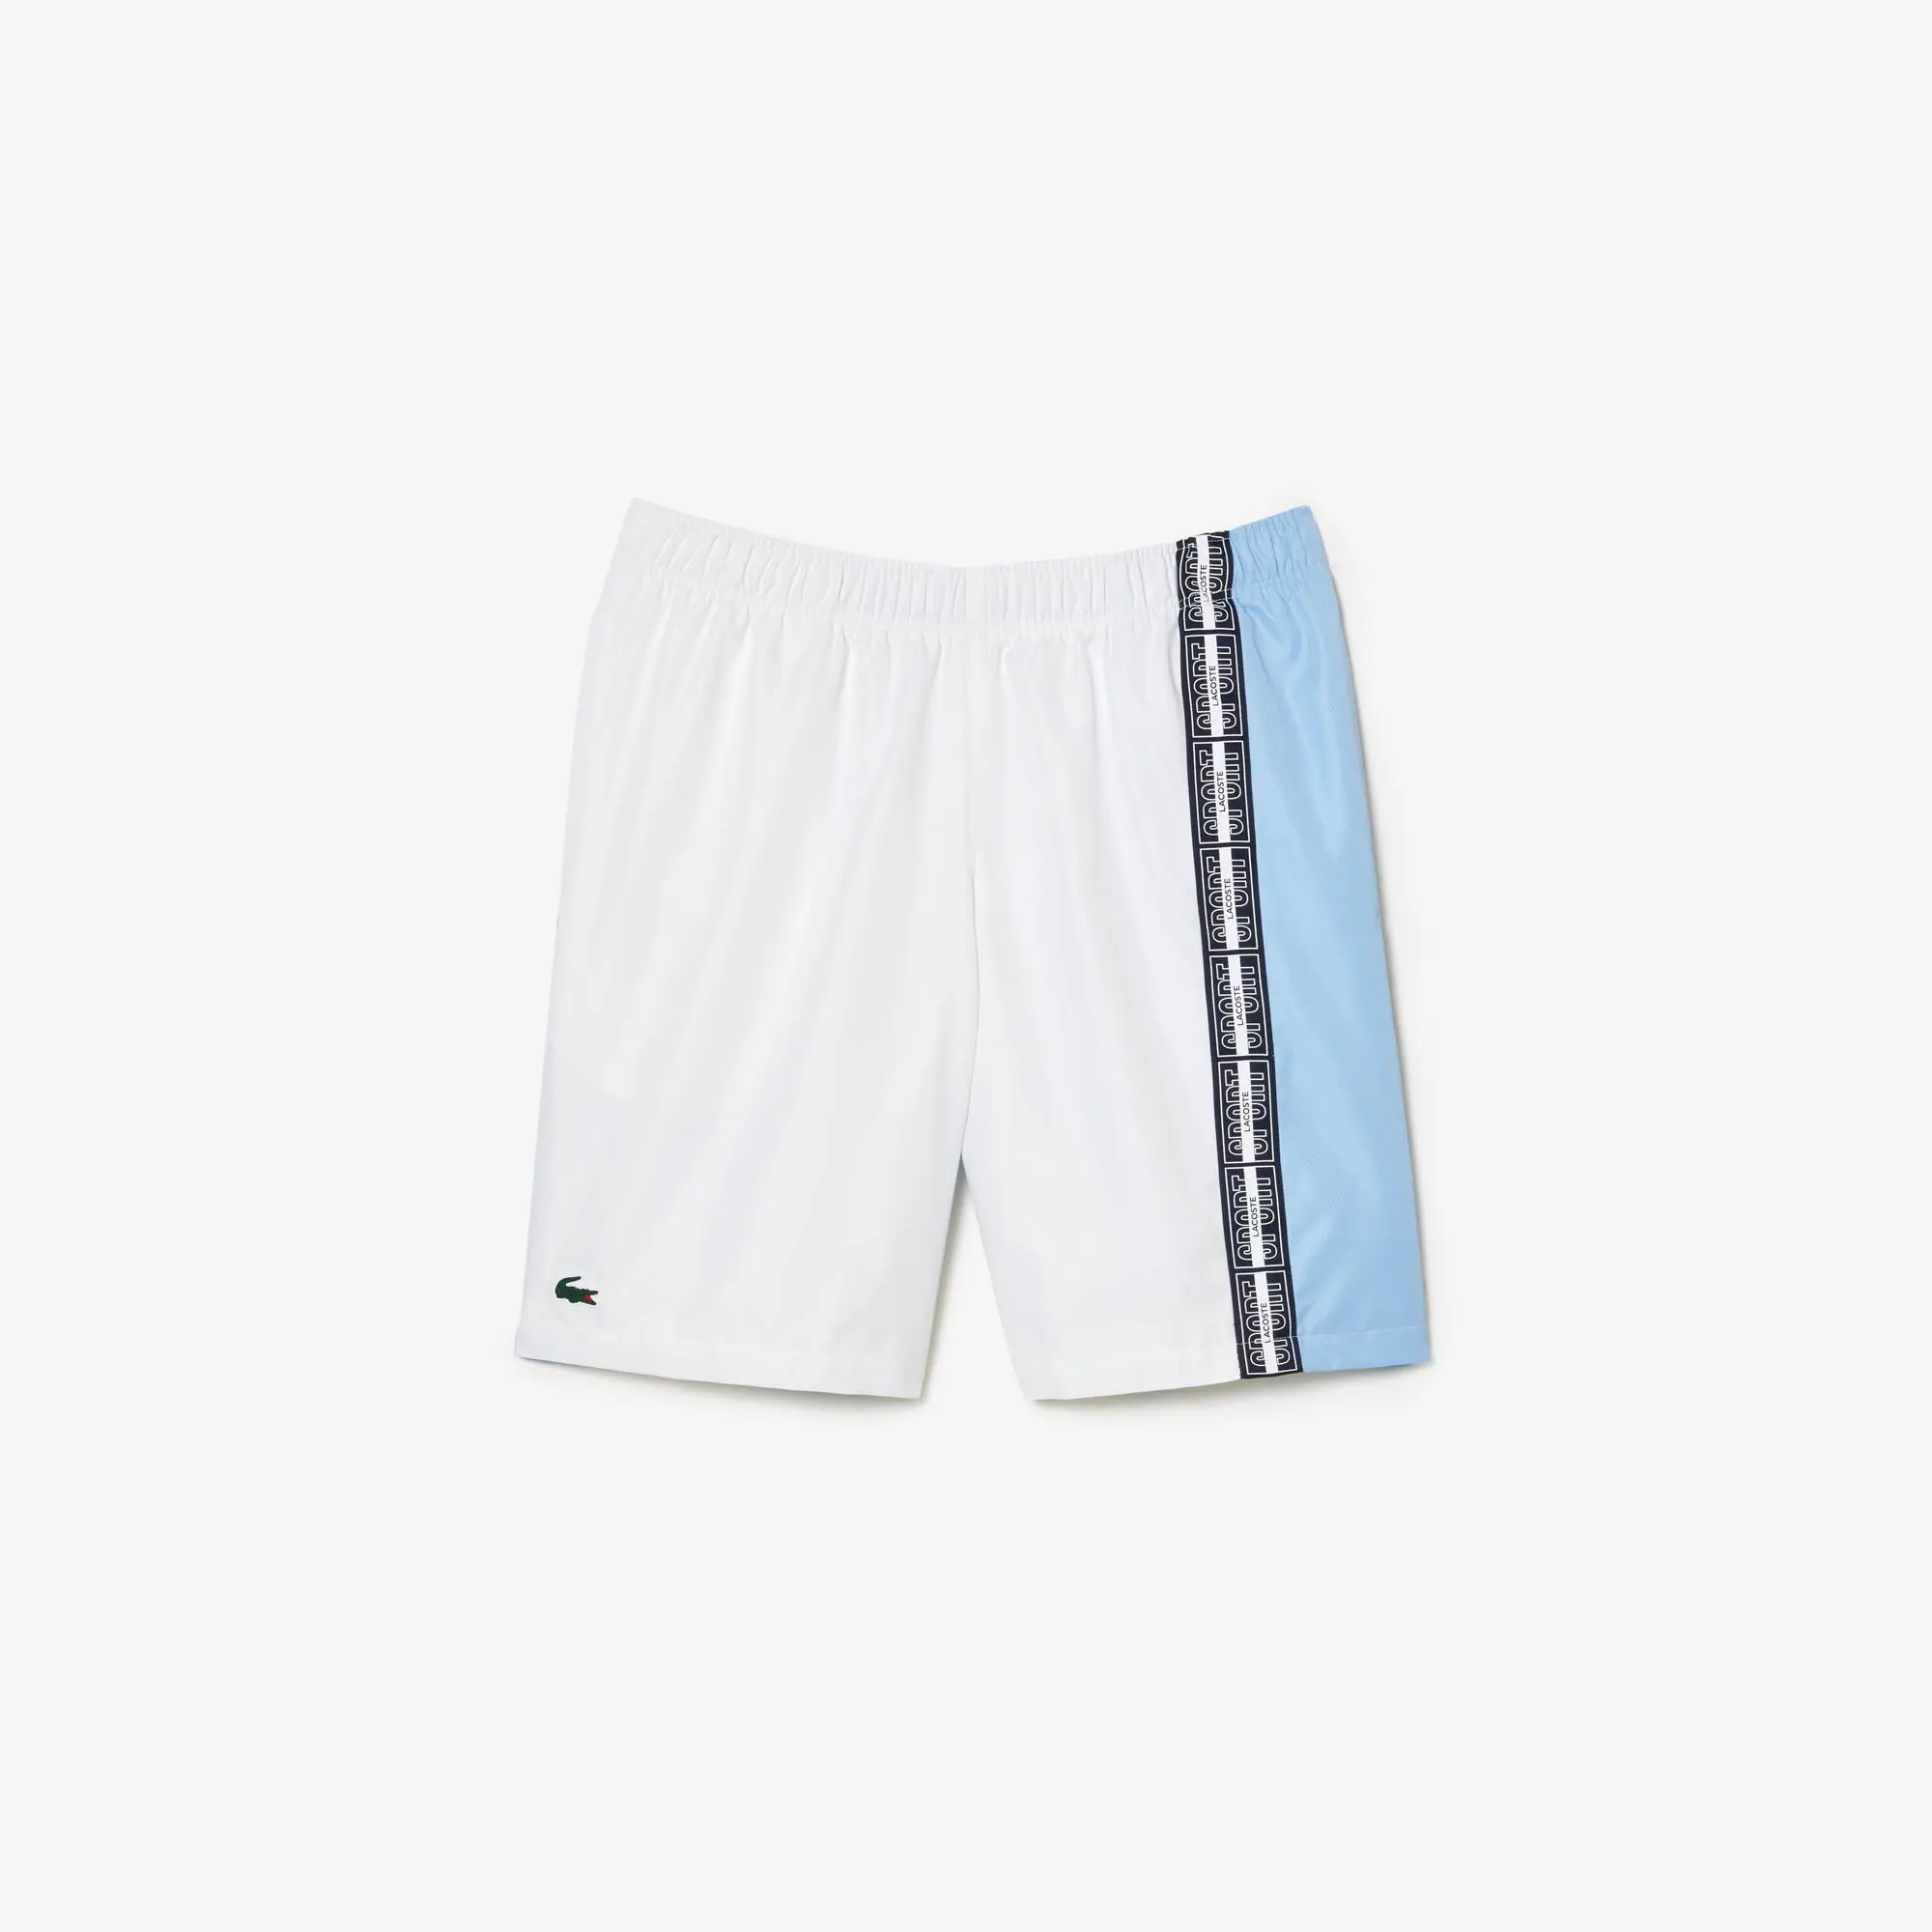 Lacoste Regular Fit Recycled Fiber Tennis Shorts. 2